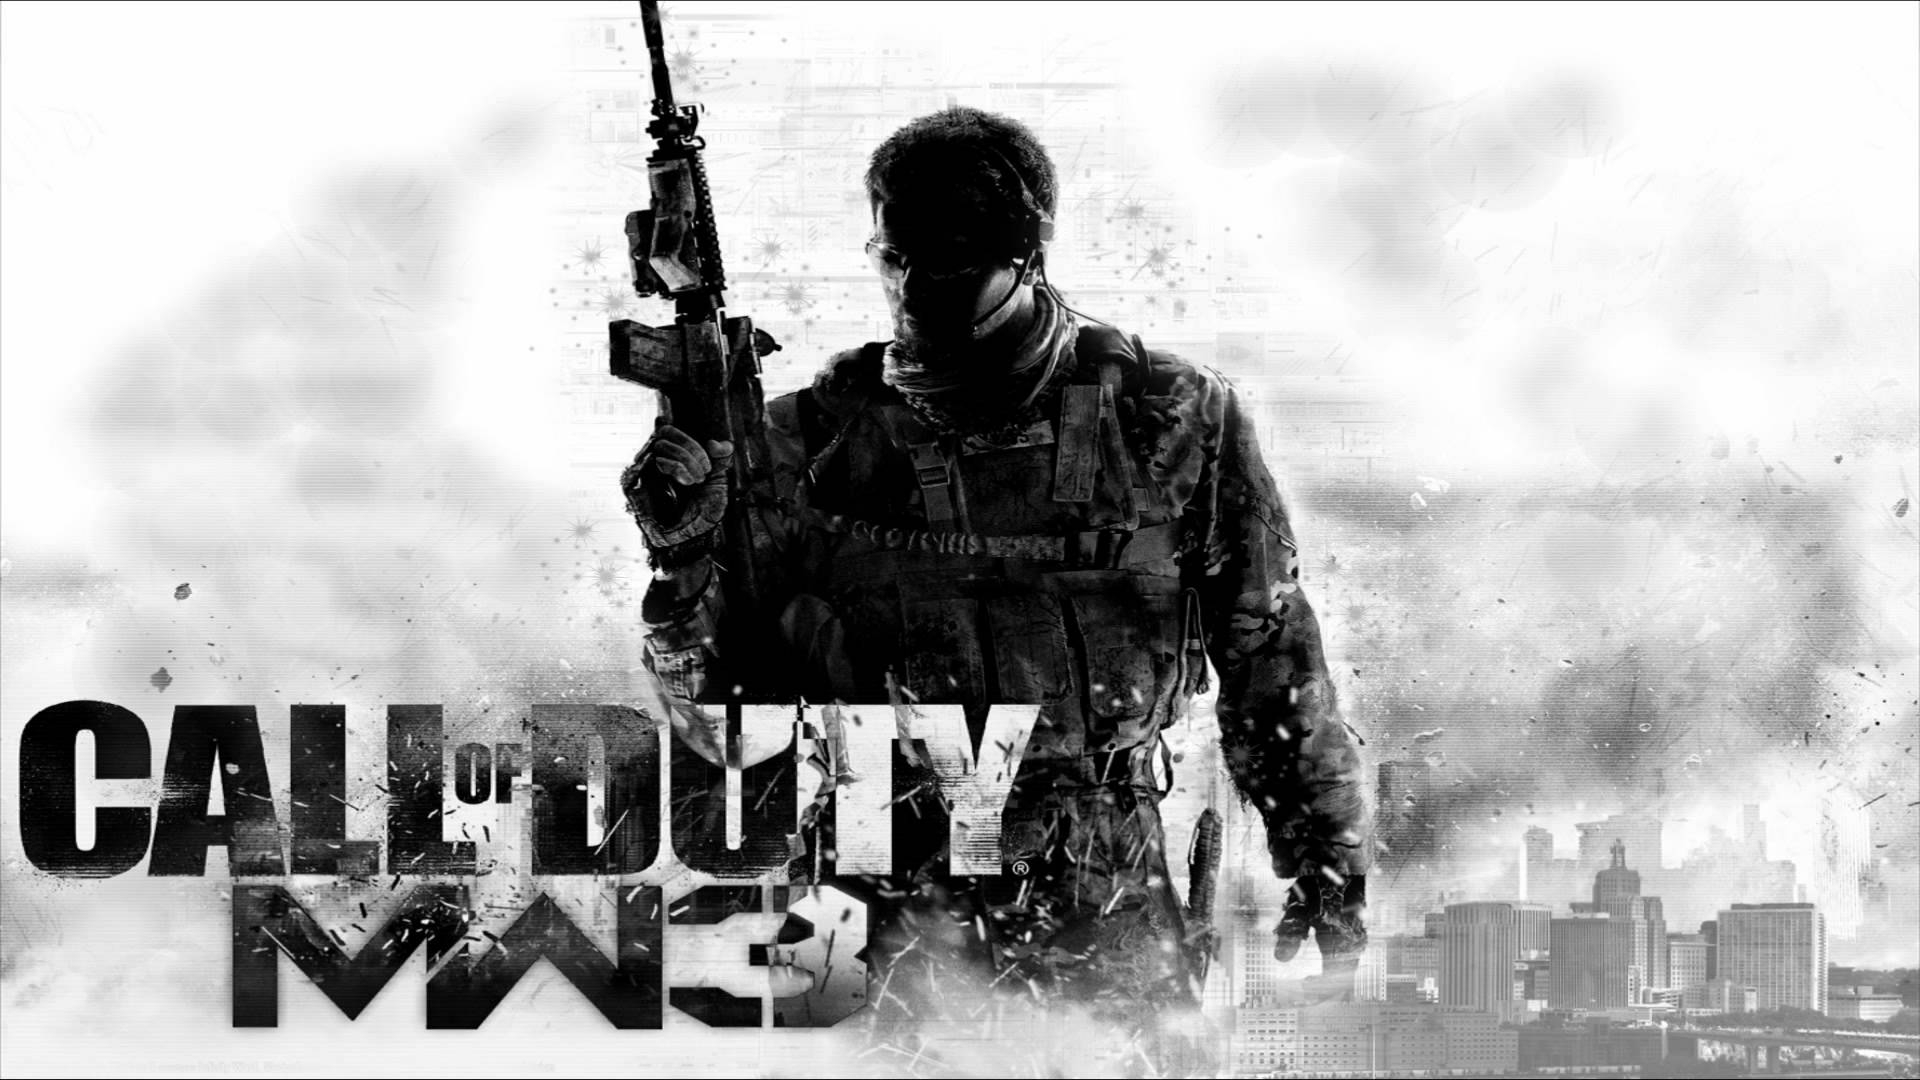 mw3 wallpaper,poster,soldier,font,photography,movie